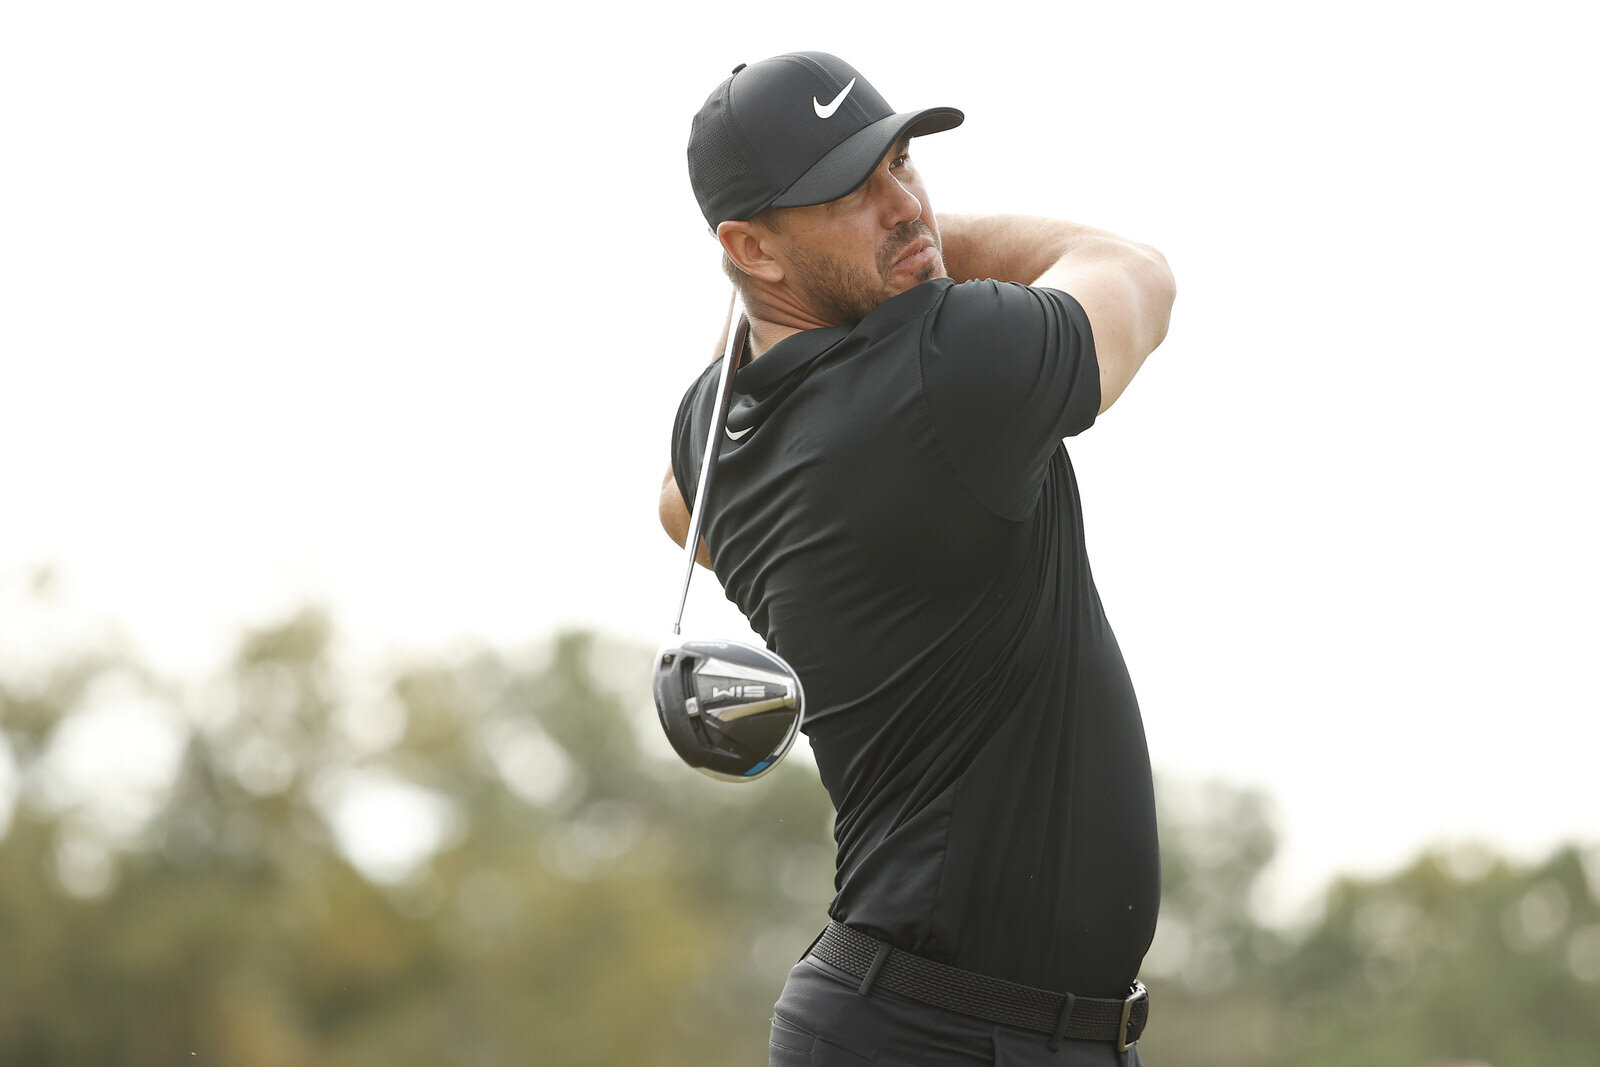  HOUSTON, TEXAS - NOVEMBER 05: Brooks Koepka of the United States plays his shot from the tenth tee during the first round of the Vivint Houston Open at Memorial Park Golf Course on November 05, 2020 in Houston, Texas. (Photo by Maddie Meyer/Getty Im